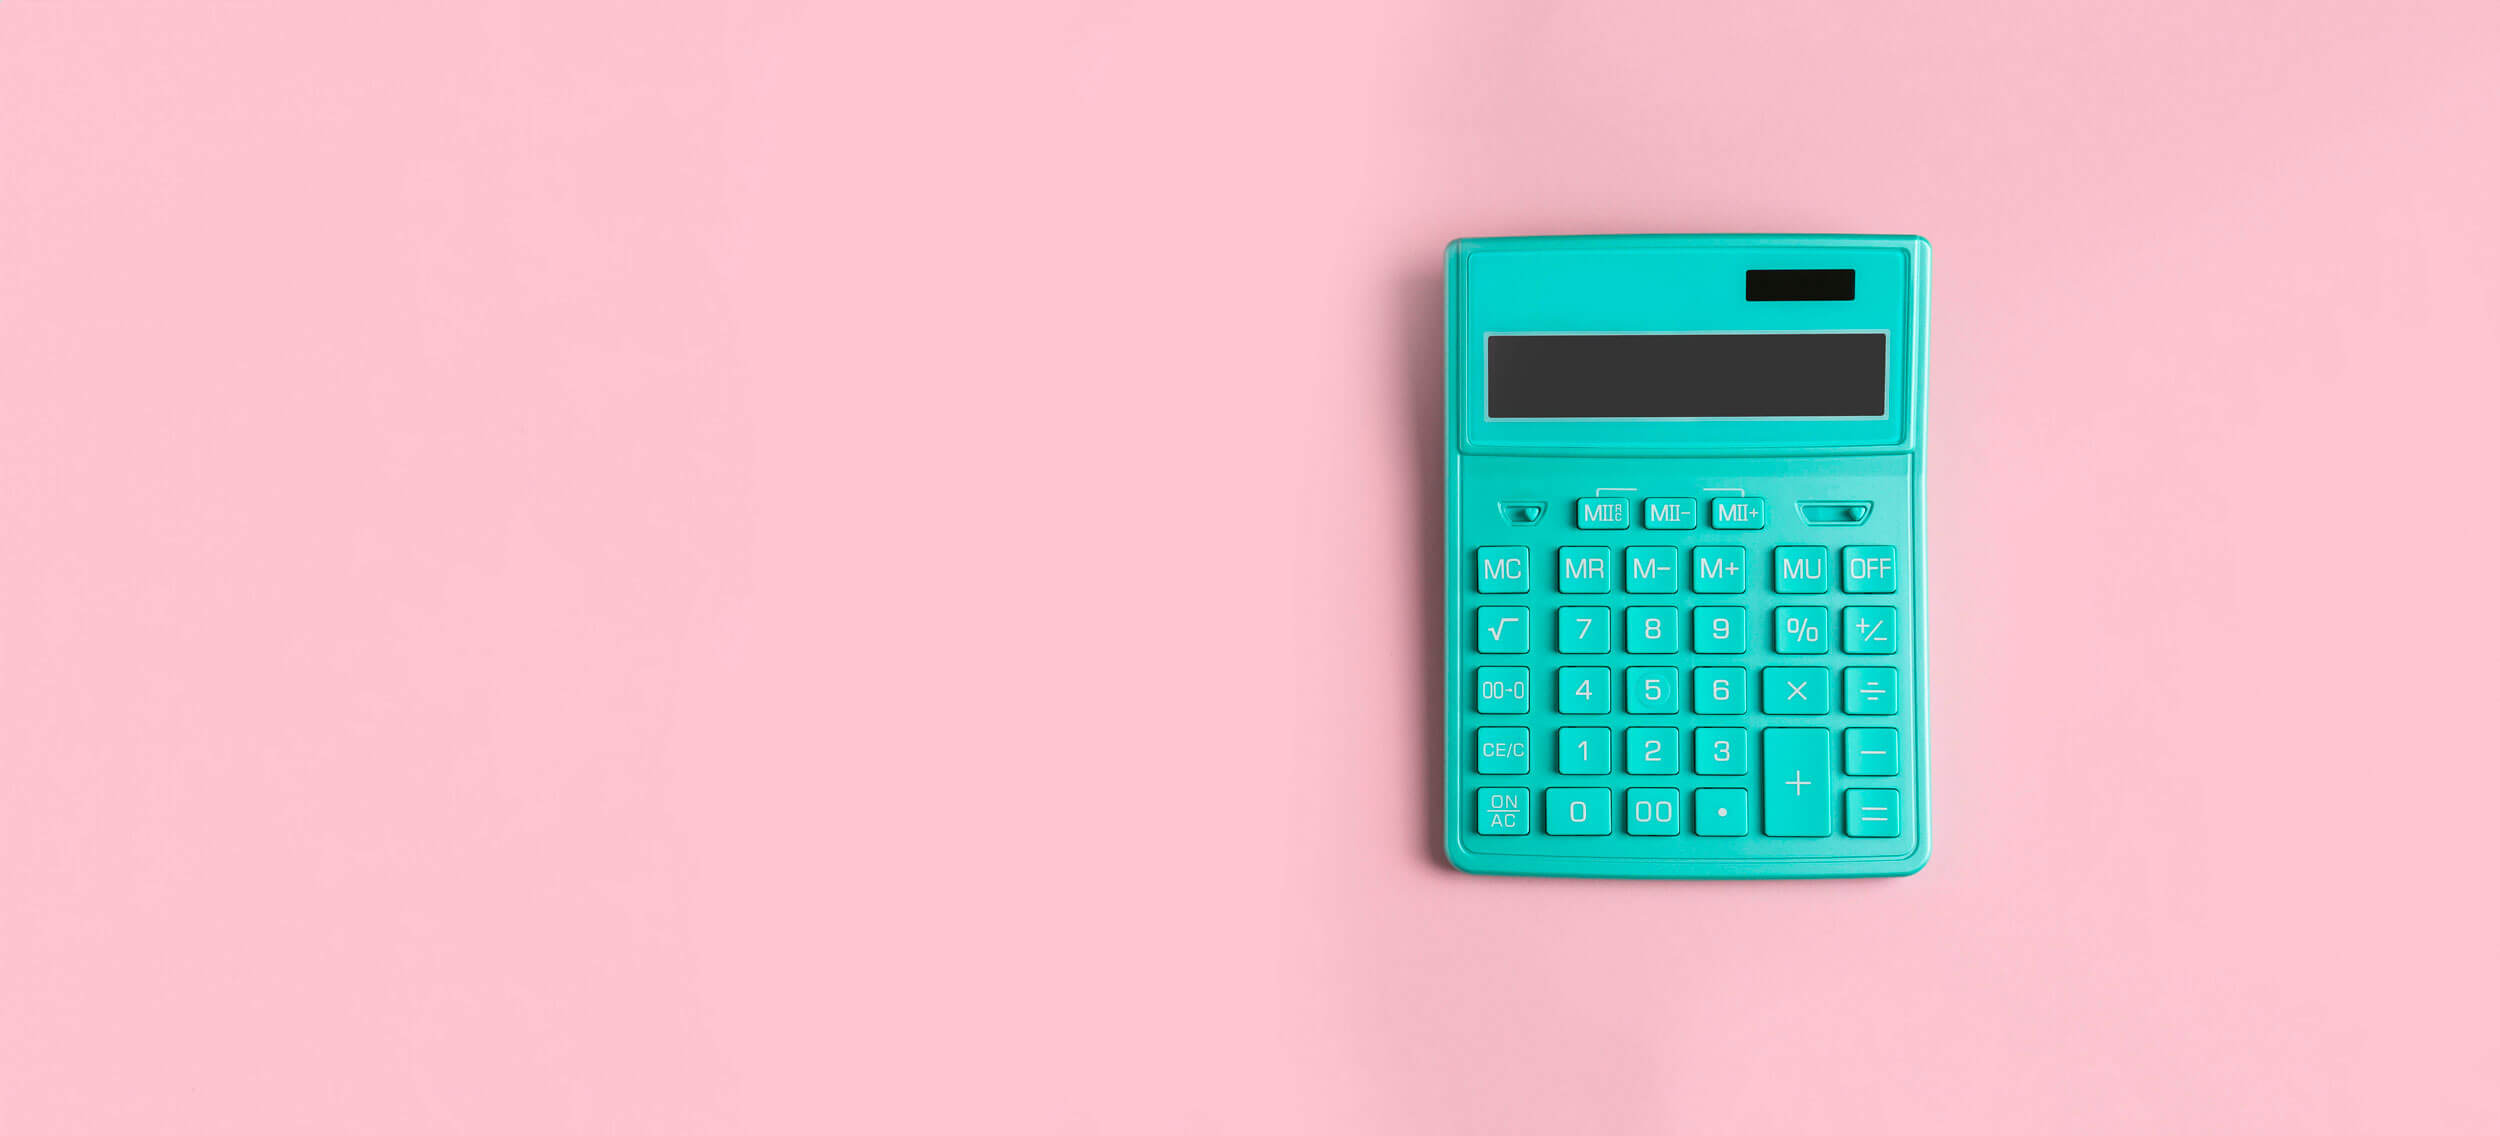 turquise calculator on pink background